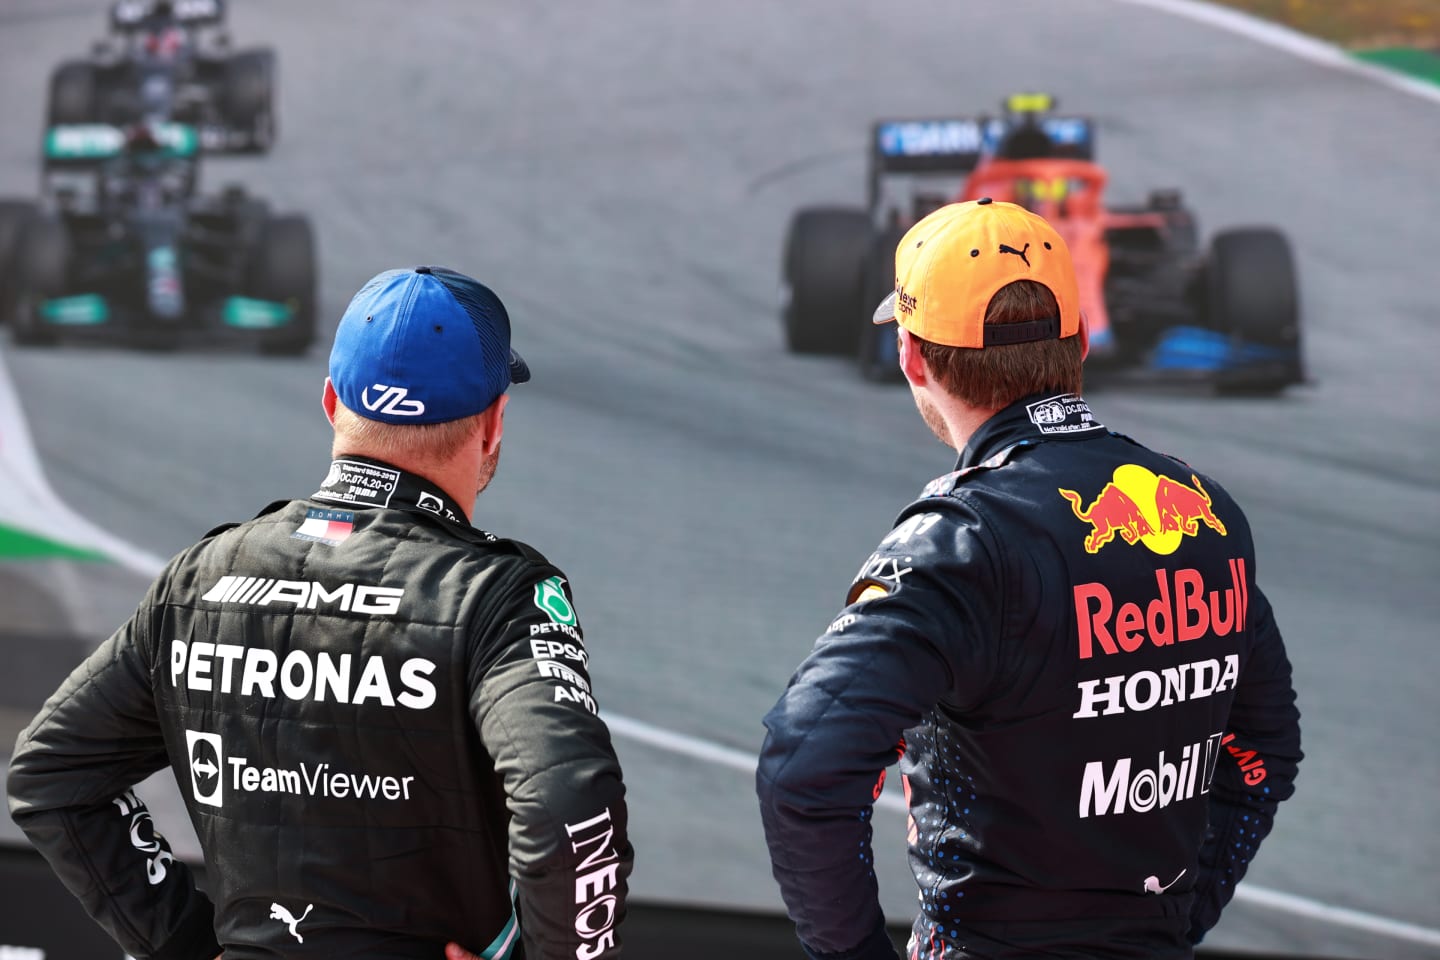 SPIELBERG, AUSTRIA - JULY 04: Race winner Max Verstappen of Netherlands and Red Bull Racing and second placed Valtteri Bottas of Finland and Mercedes GP talk in parc ferme during the F1 Grand Prix of Austria at Red Bull Ring on July 04, 2021 in Spielberg, Austria. (Photo by Mark Thompson/Getty Images)